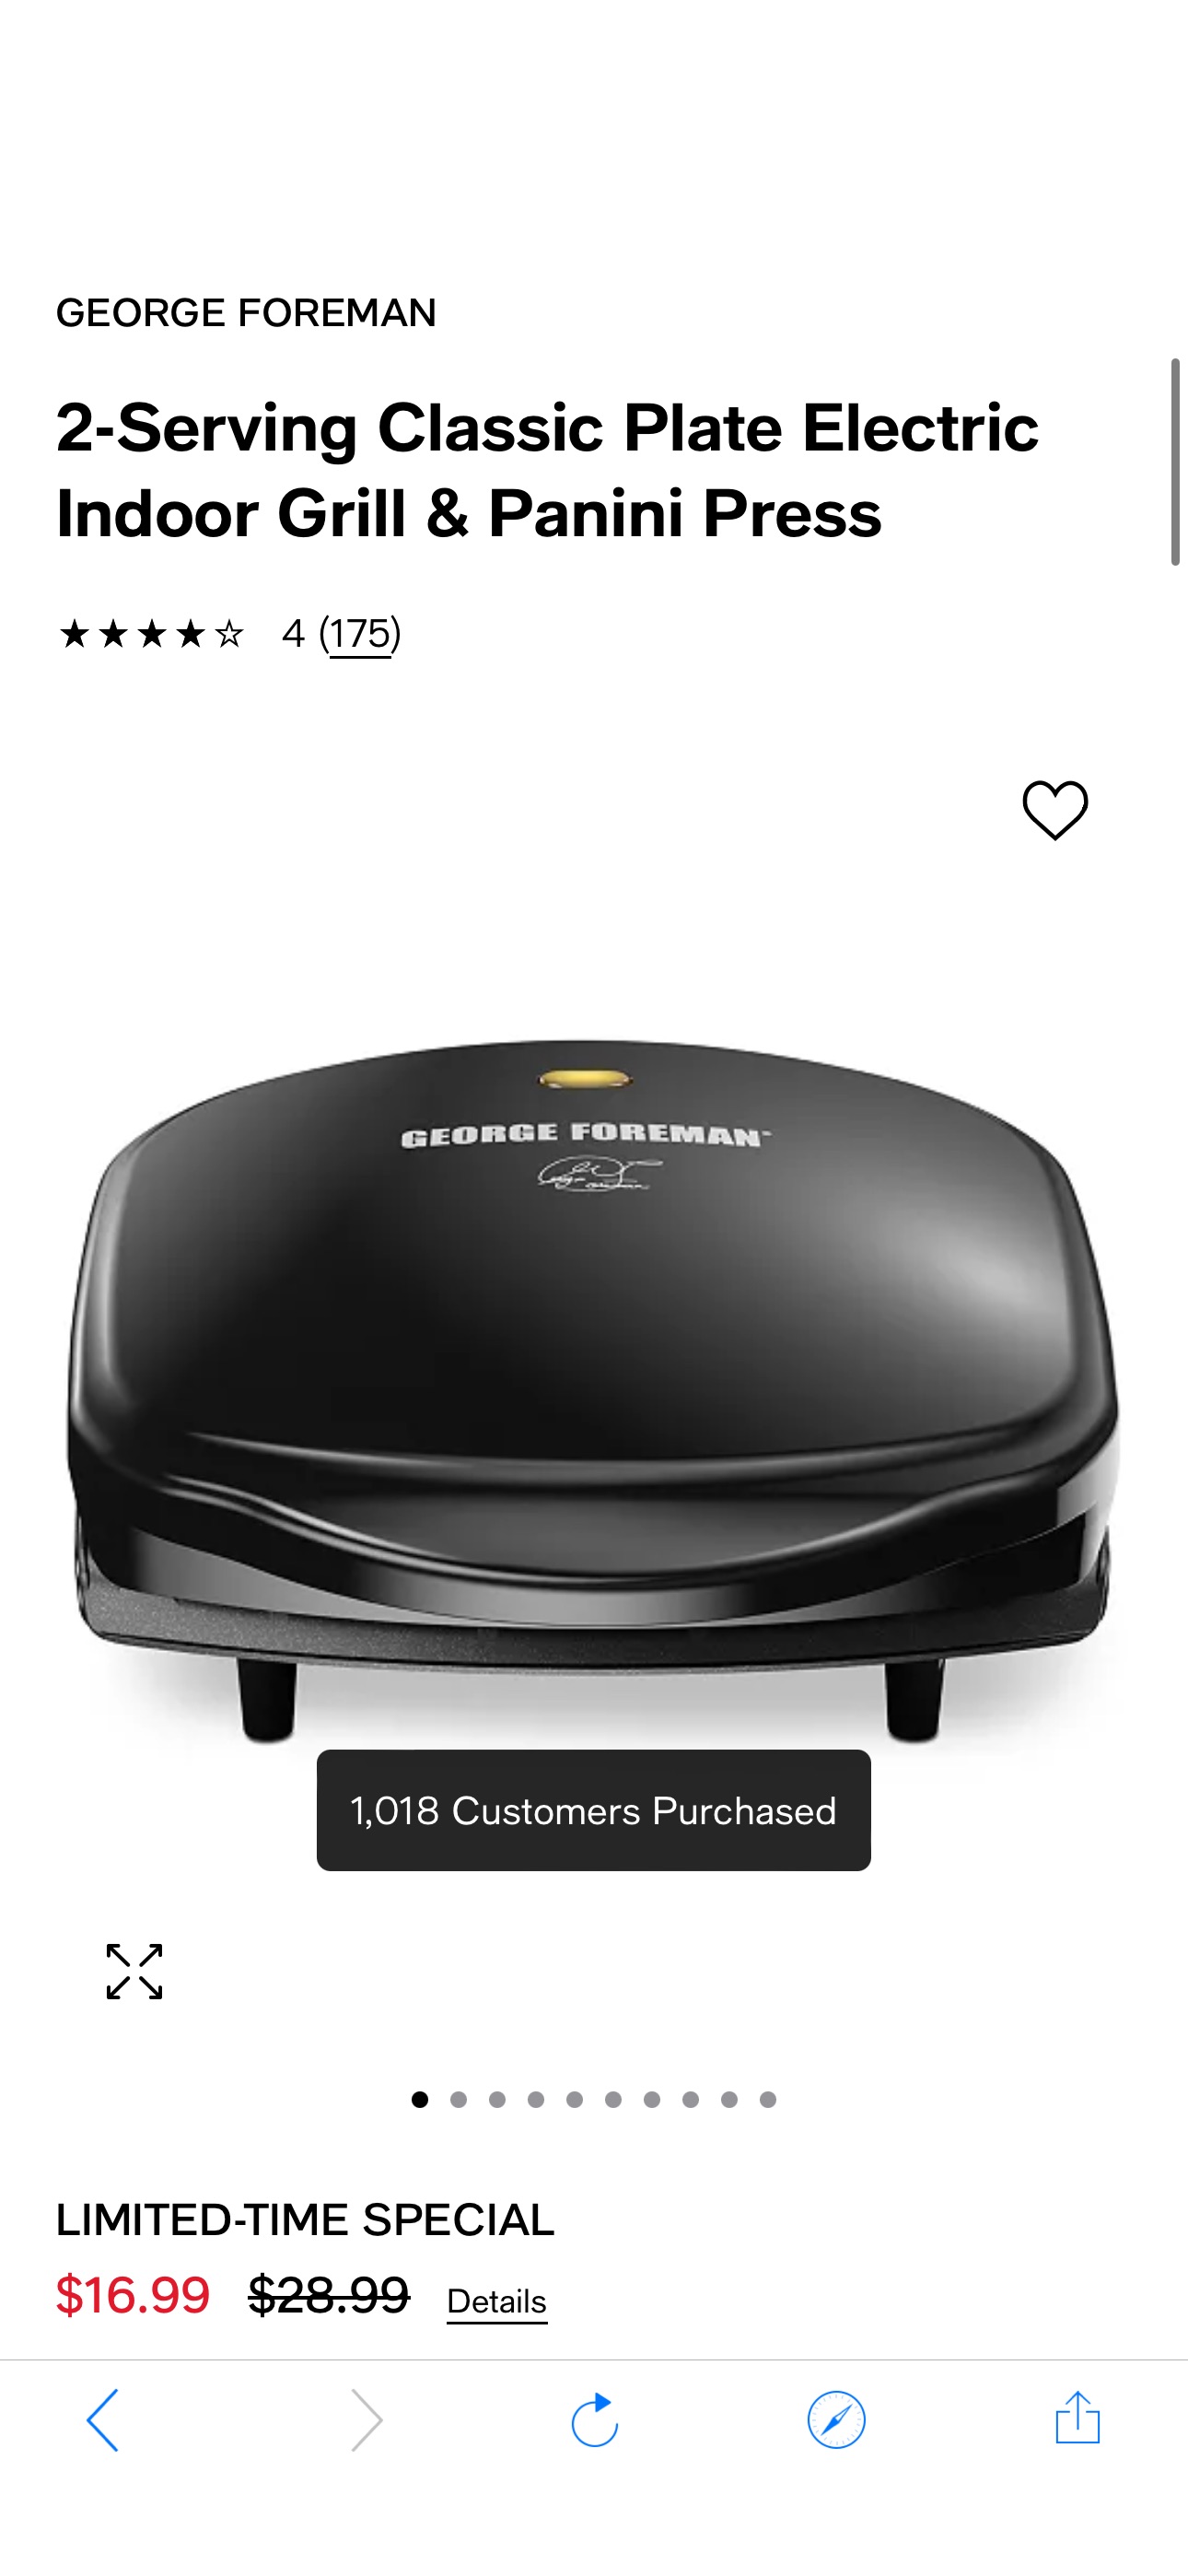 George Foreman 2-Serving Classic Plate Electric Indoor Grill & Panini Press - Macy's